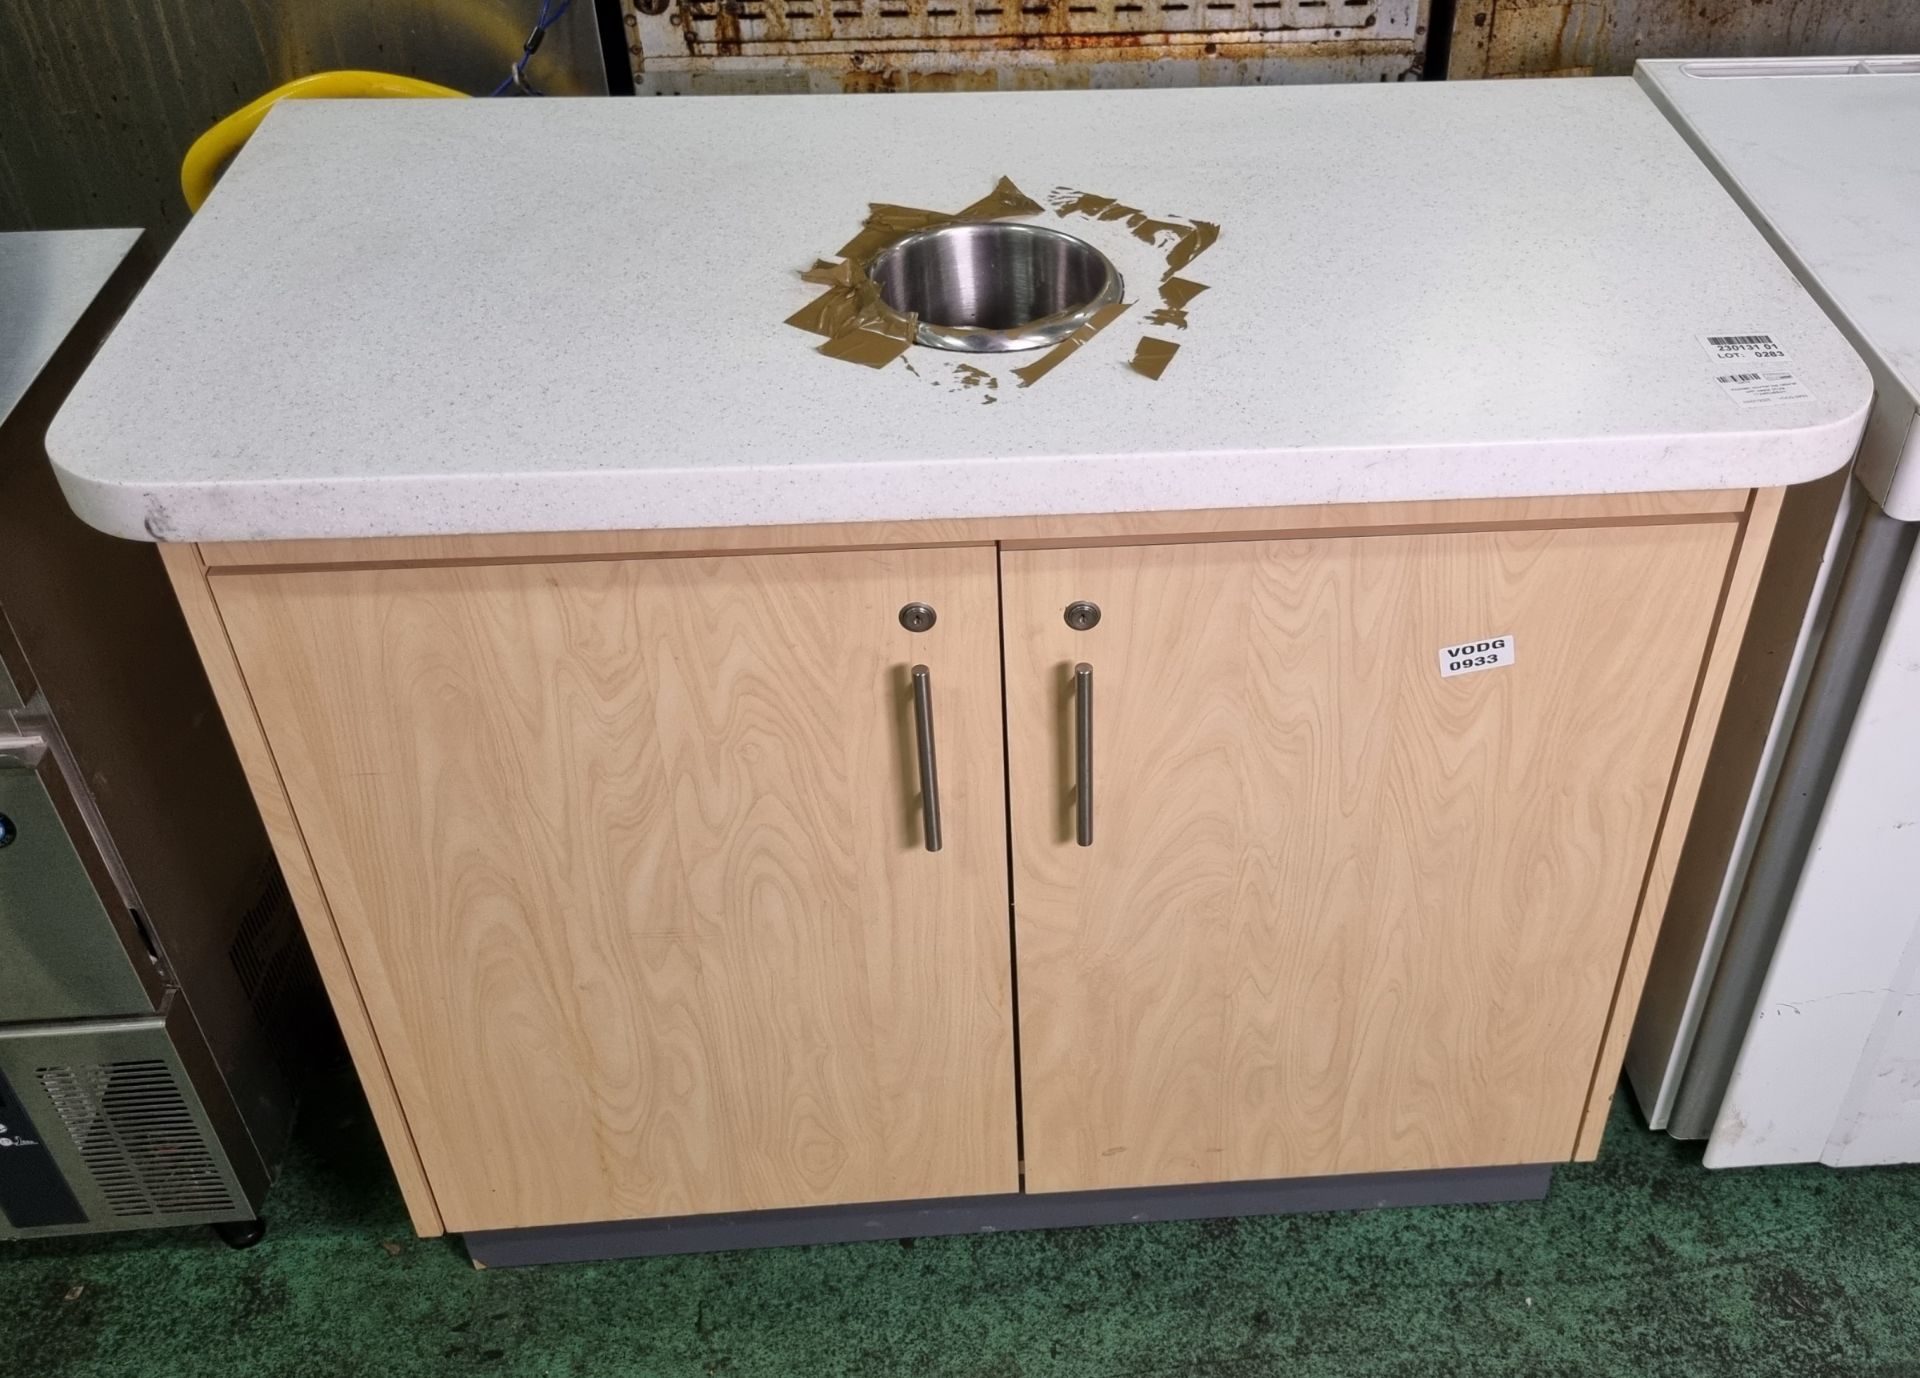 Wooden counter top cabinet with waste chute - 112x60x88cm - Image 2 of 6